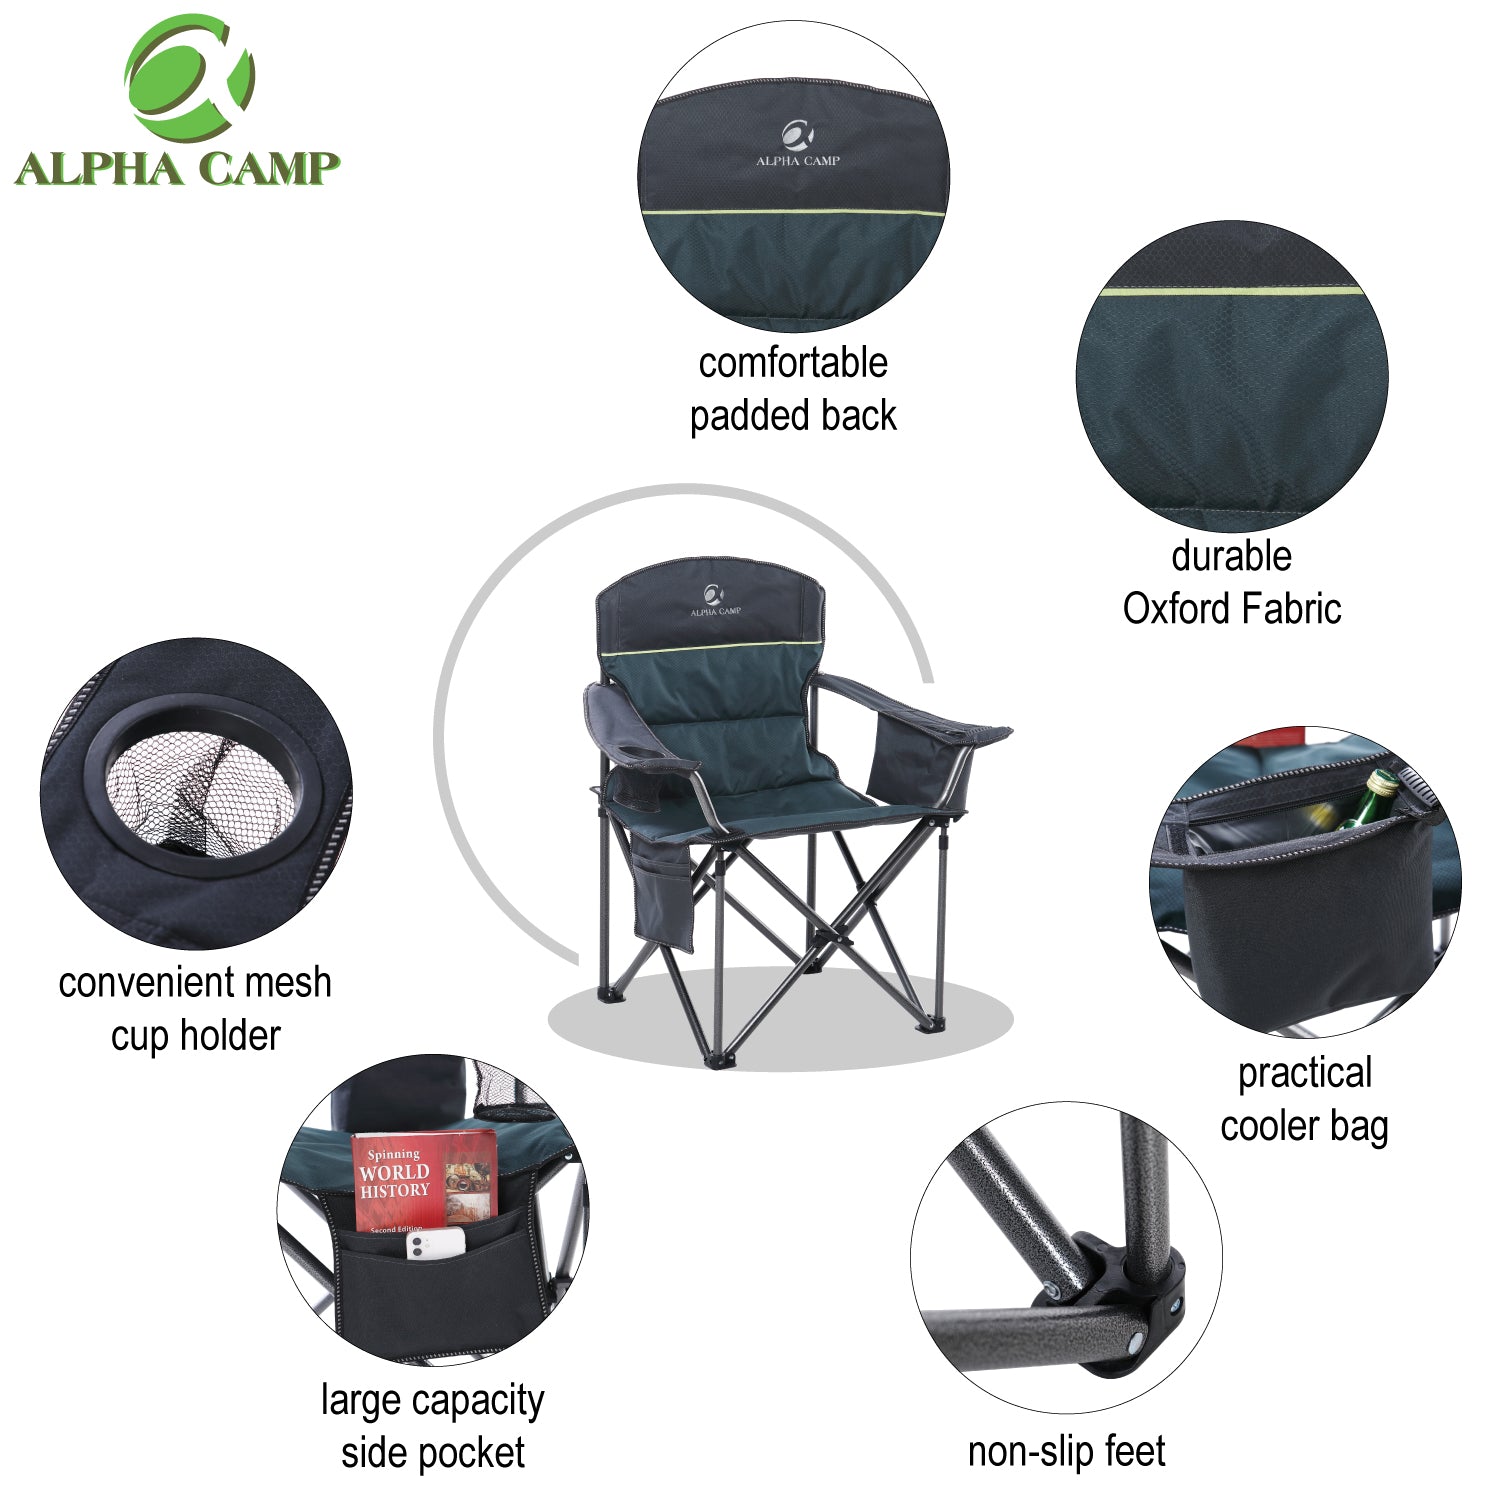 ALPHA CAMP Folding Camping Chair Portable Padded Oversized Chairs